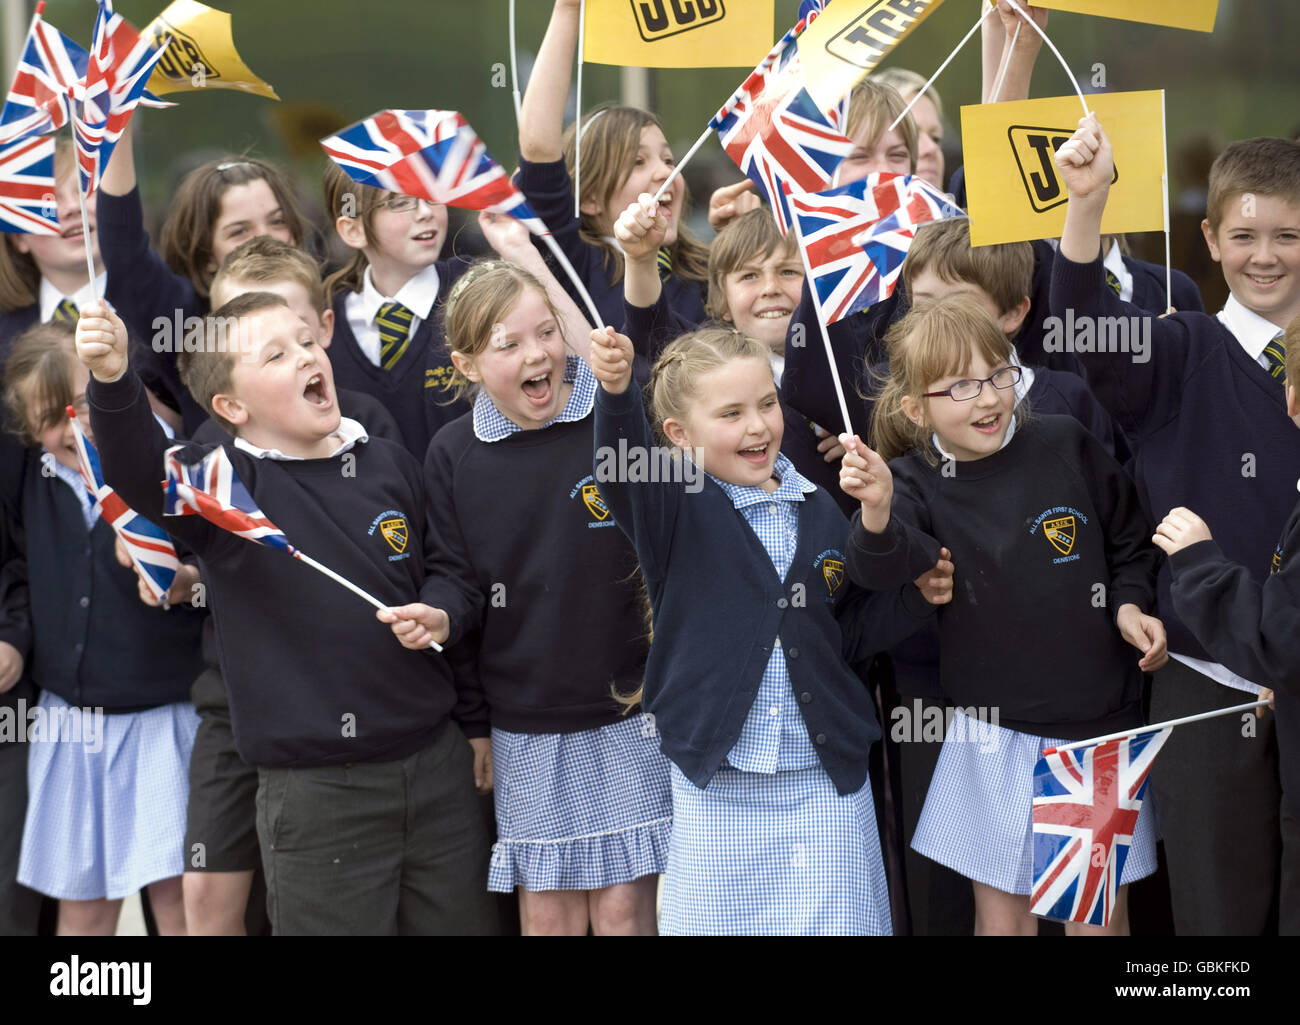 Children wait for Prince William to visit the World Headquarters of JCB, one of the world's largest manufacturers of construction equipment, to mark the production of the company's 750,000th machine at JC Bamford Excavators Ltd, Rocester, Staffordshire. Stock Photo